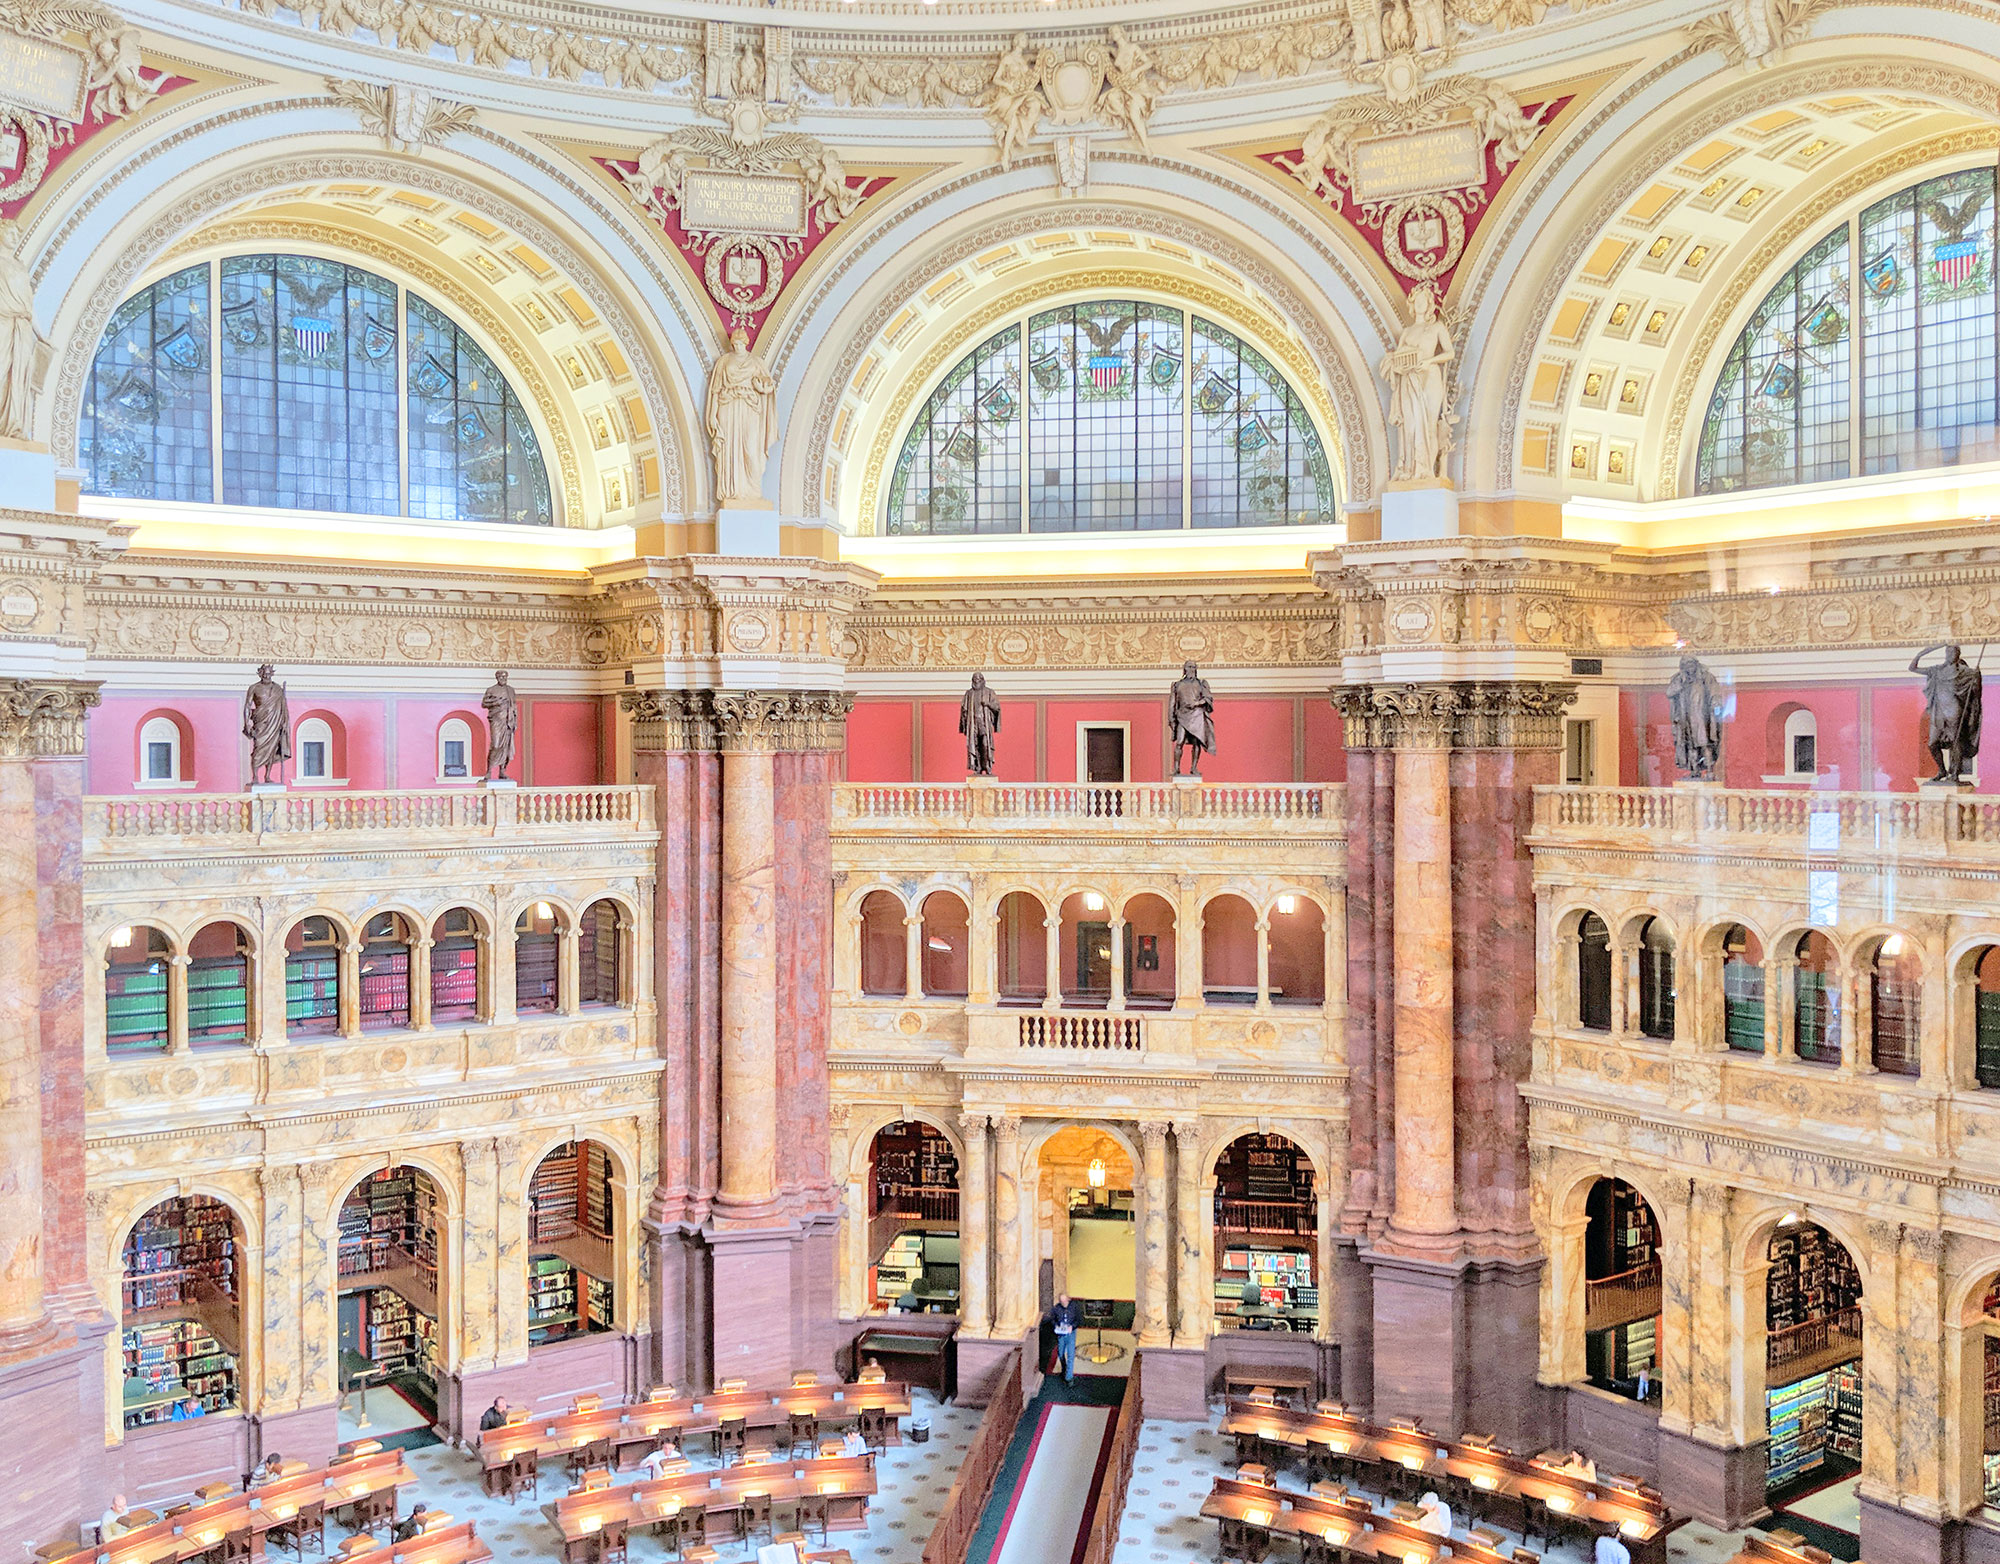 The reading room of the Library of Congress in Washington, D.C.